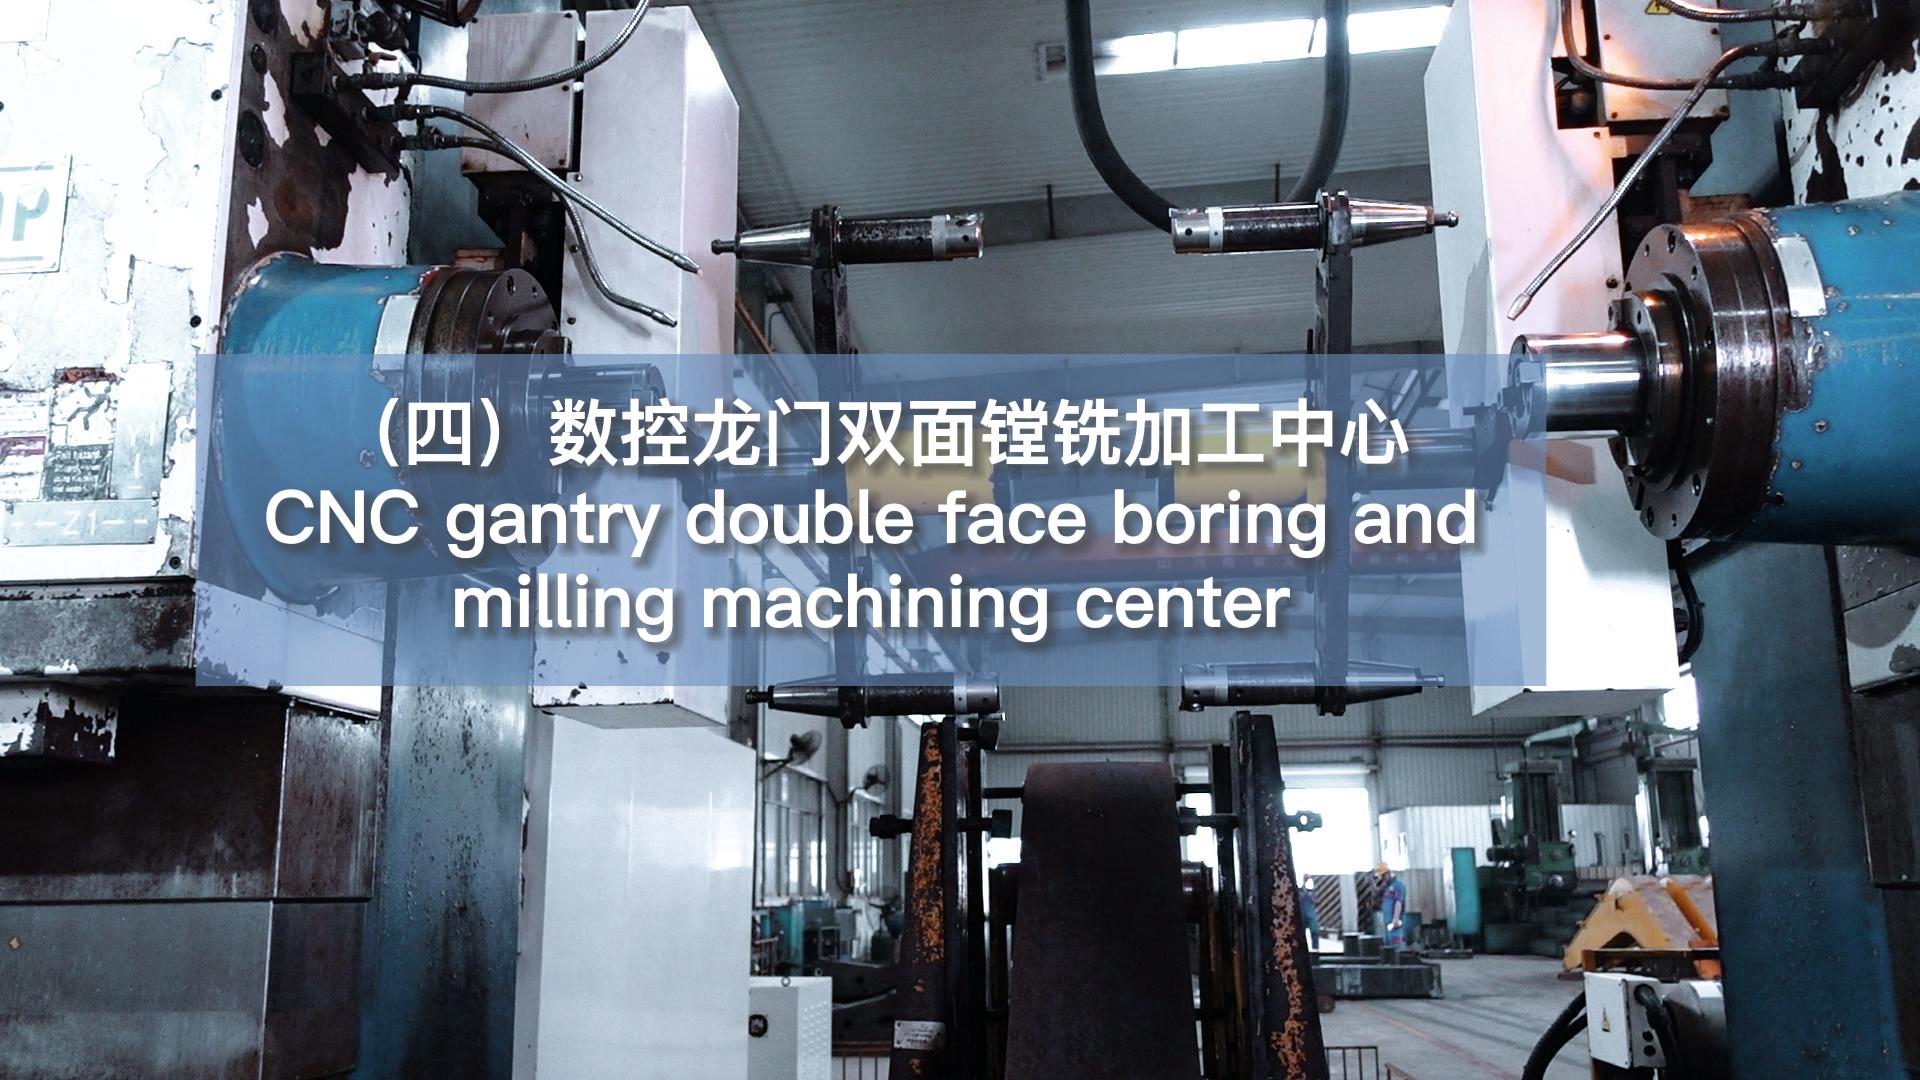 CNC Gantry Double Face Boring and Milling Machining Center